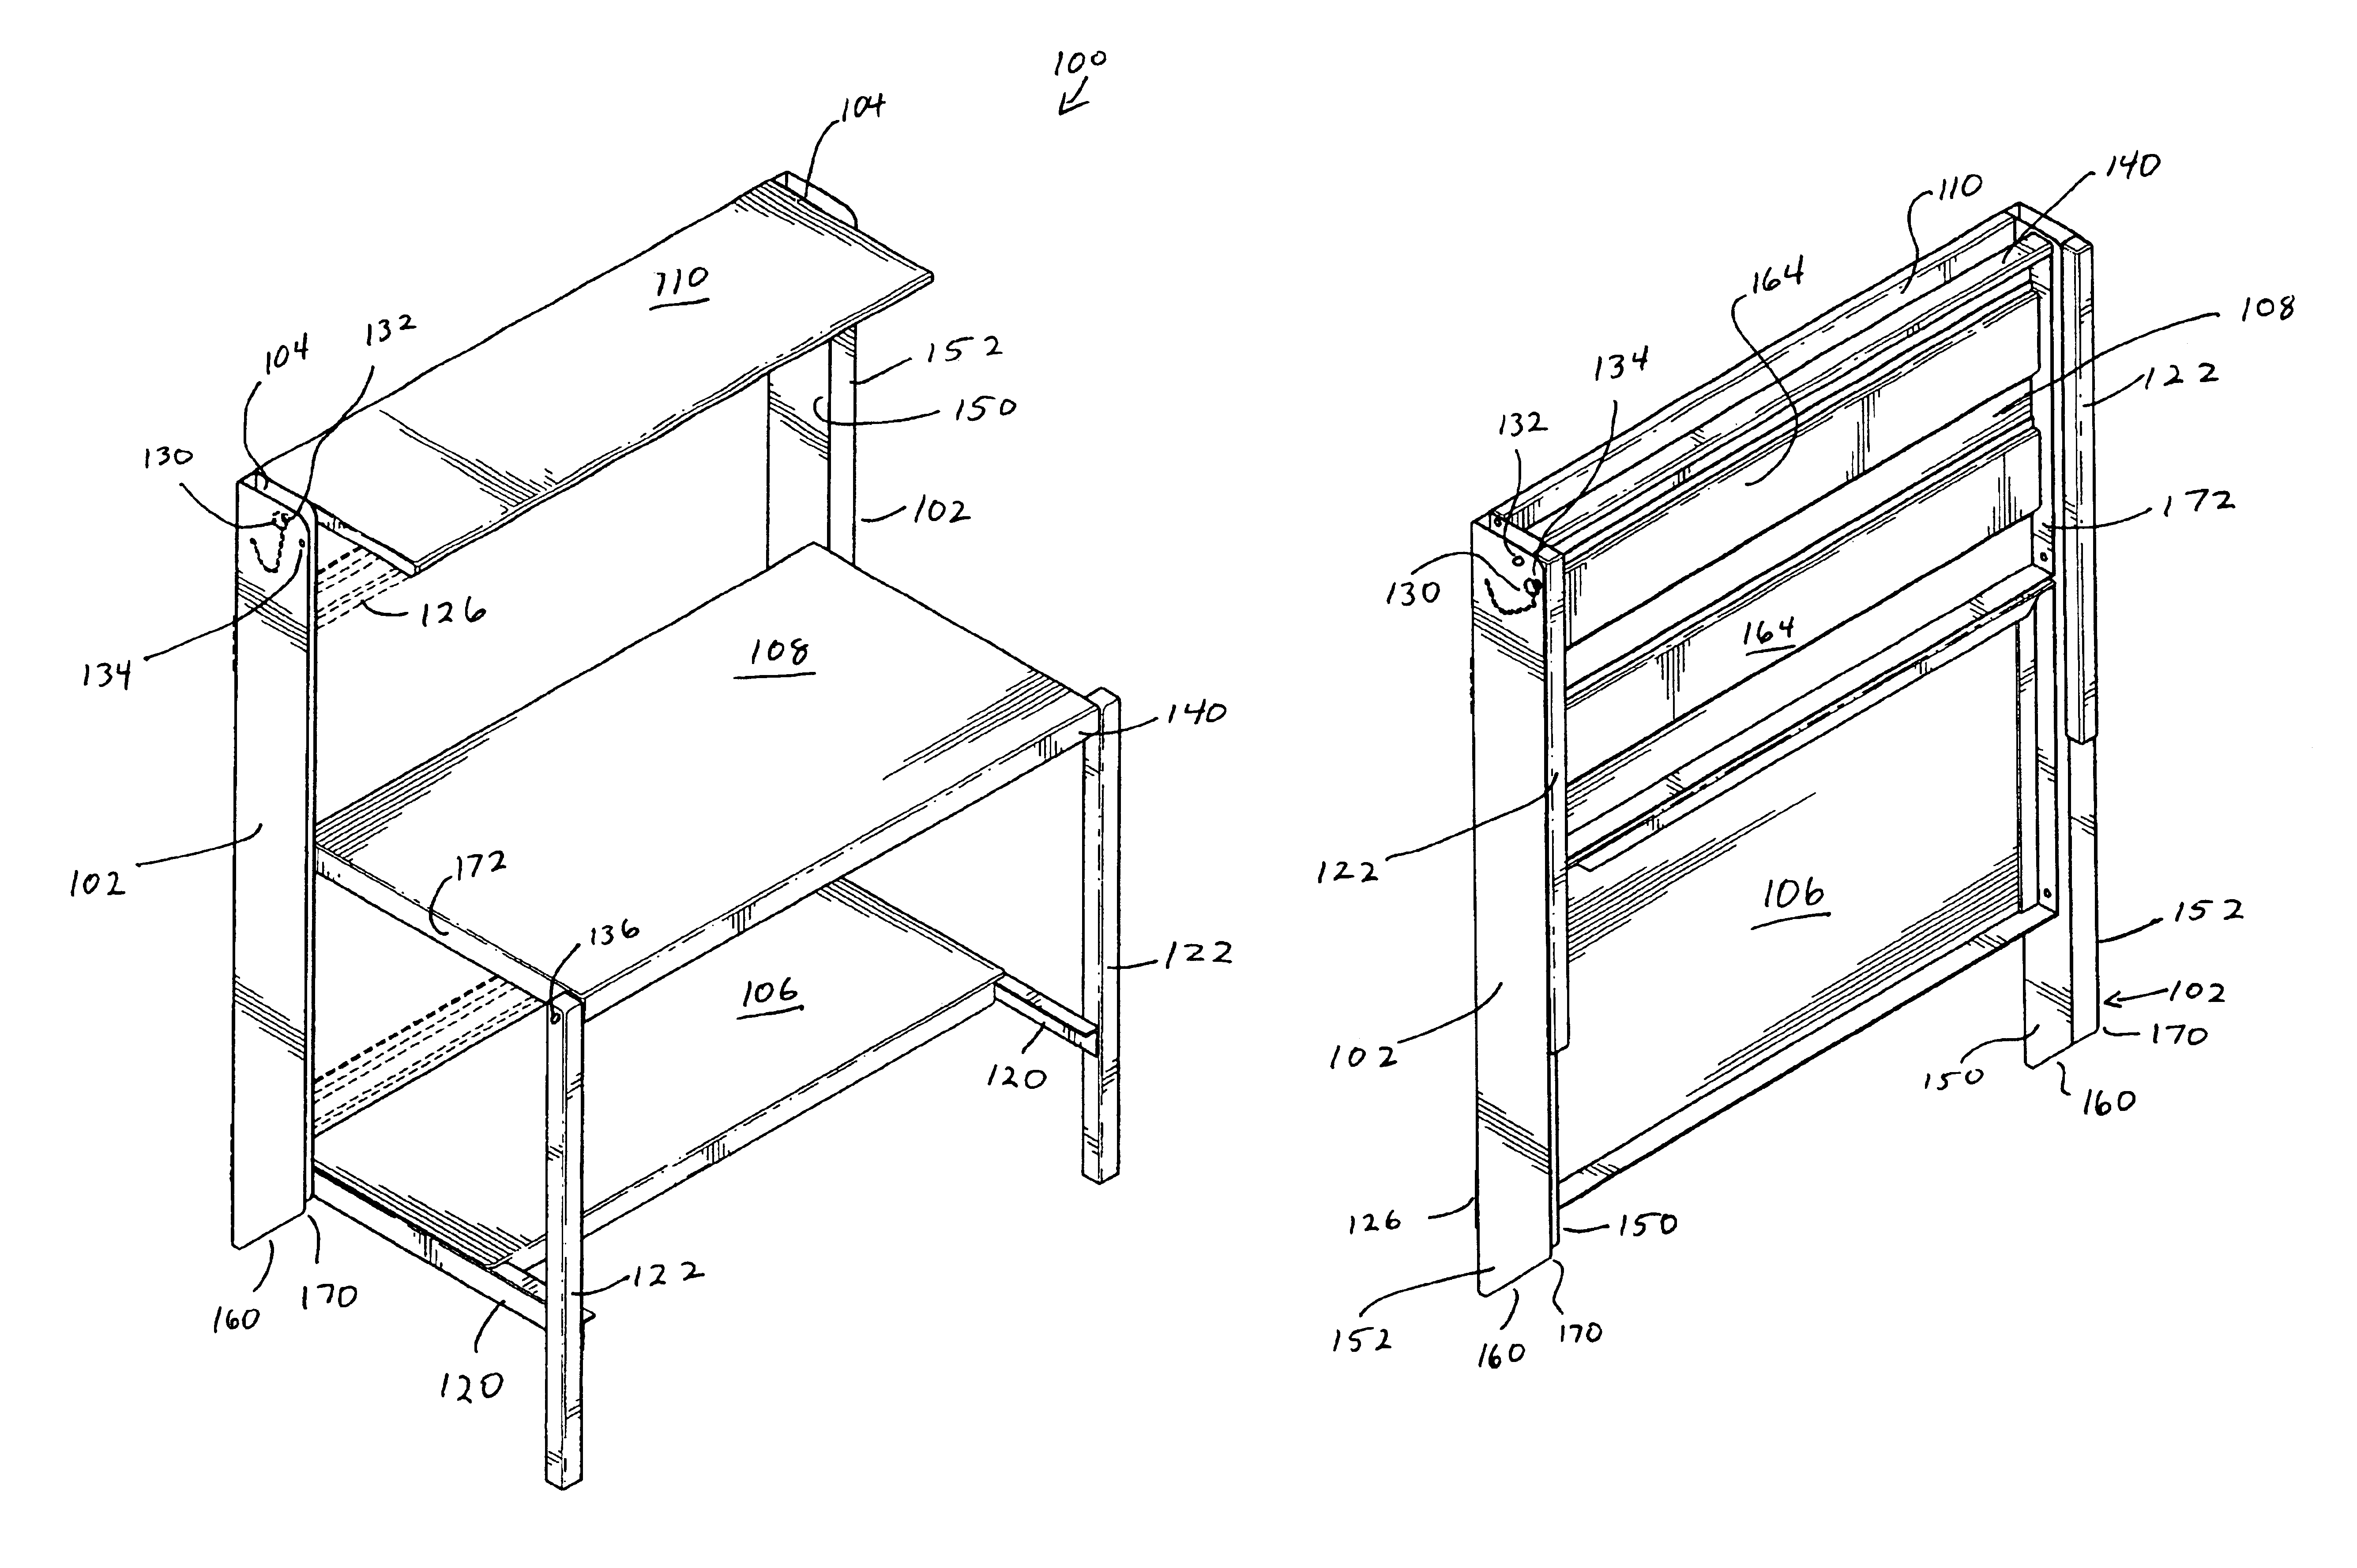 Foldable workstation and shelving system